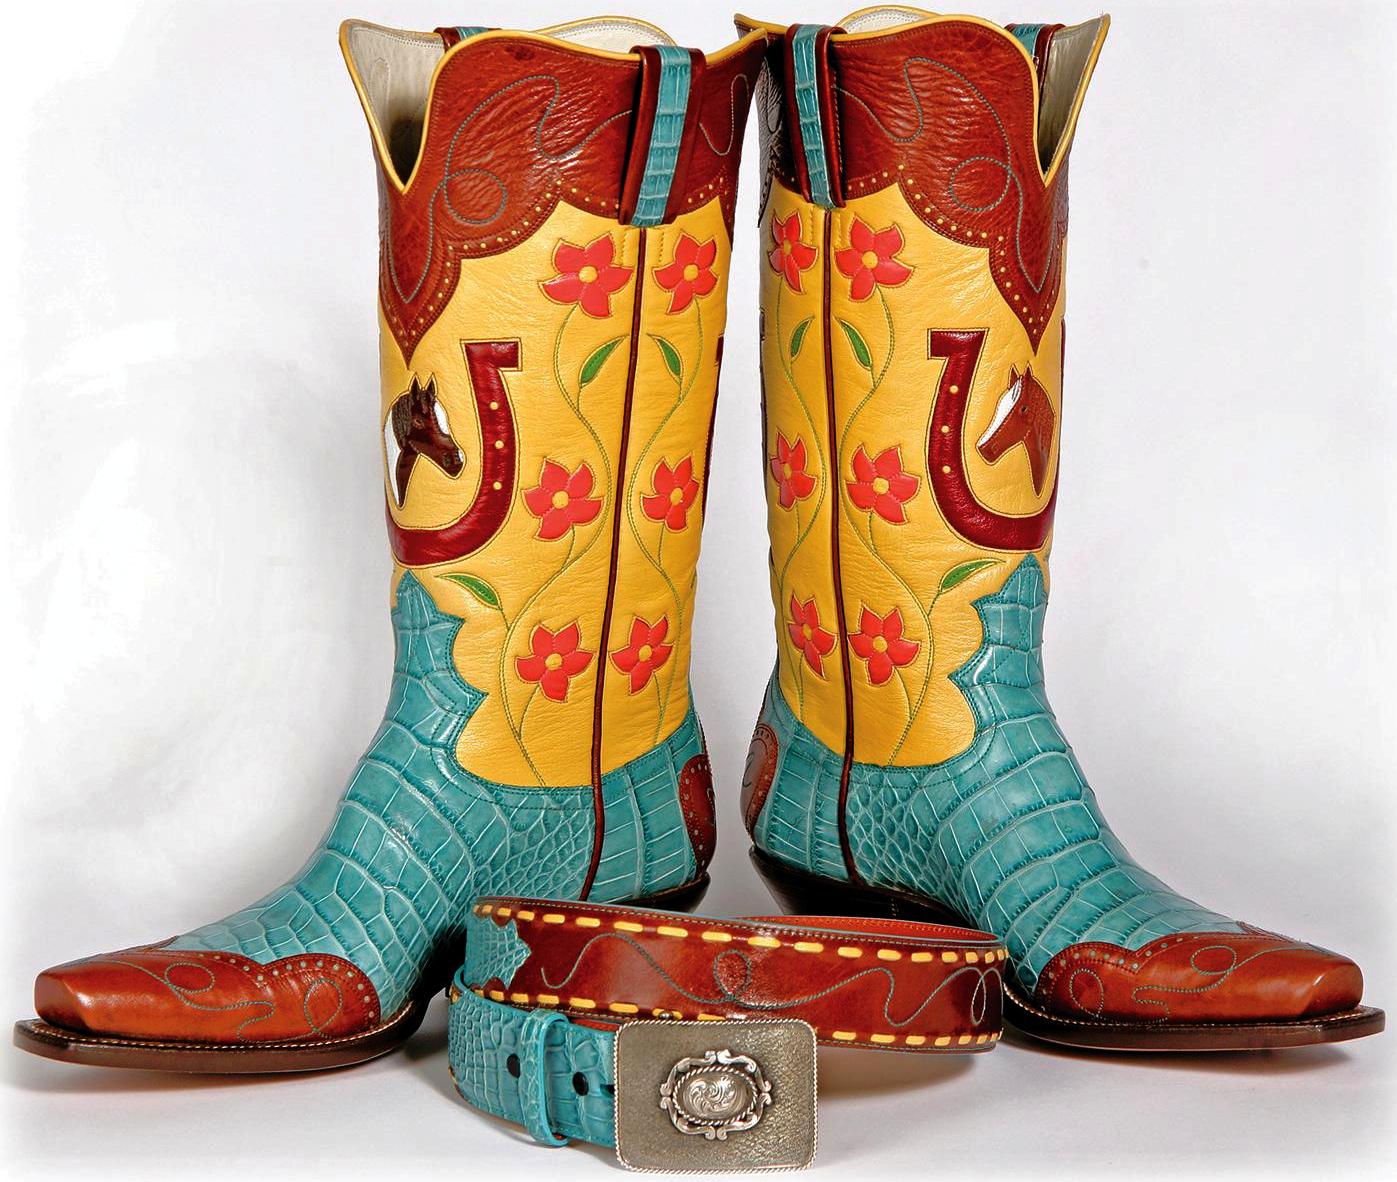 The Jackson, Wyoming-based WDC event features Western decorative arts such as these boots and belt by Lisa Sorrell.